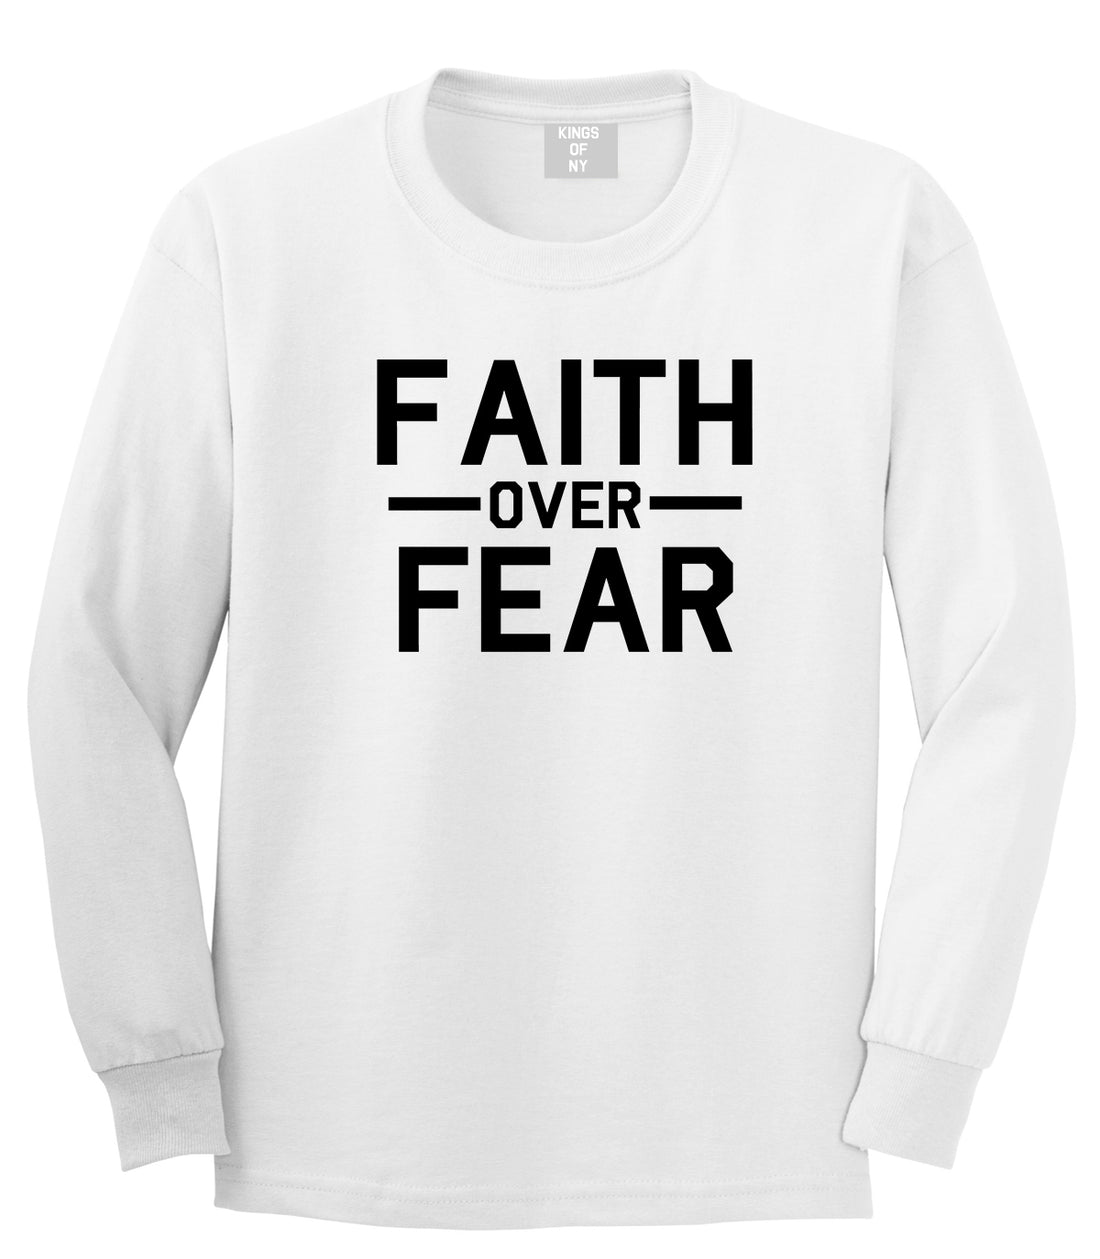 Faith Over Fear Mens White Long Sleeve T-Shirt by KINGS OF NY